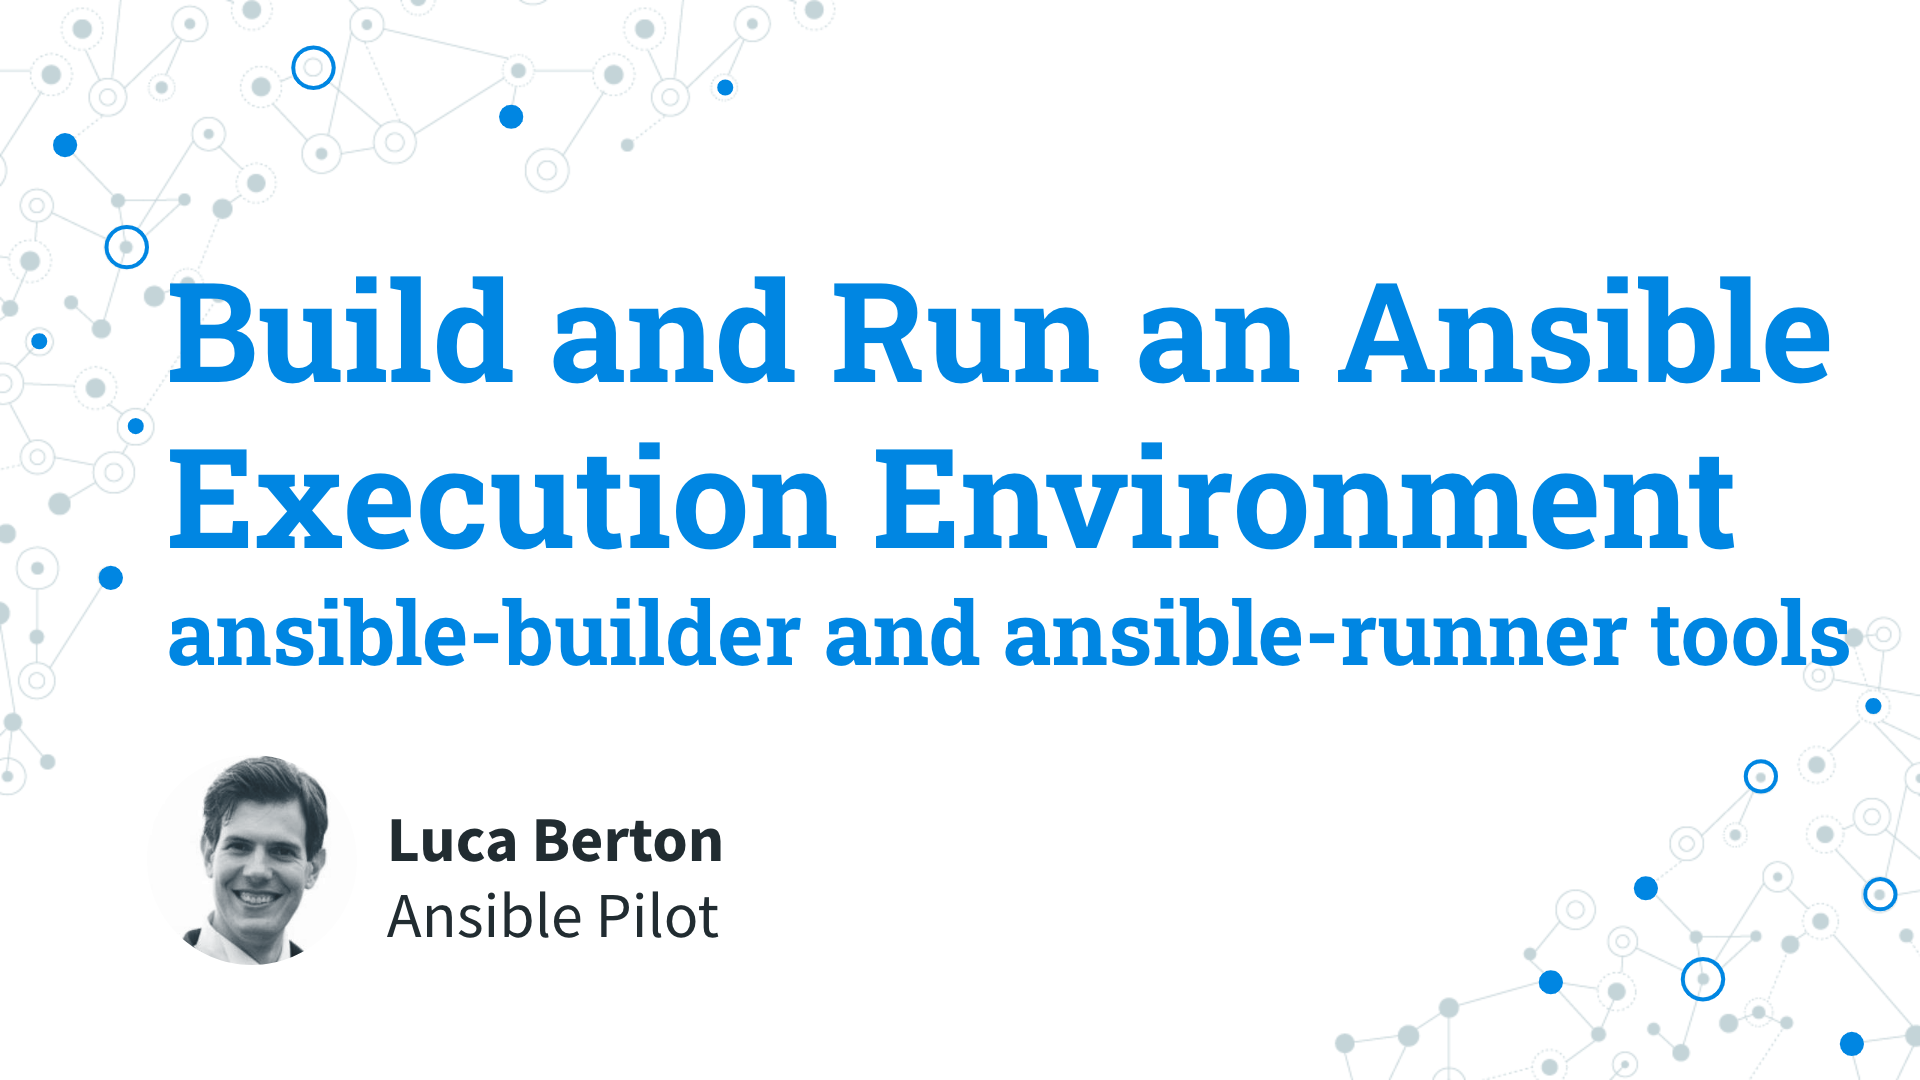 Build and Run an Ansible Execution Environment - ansible-builder and ansible-runner tools